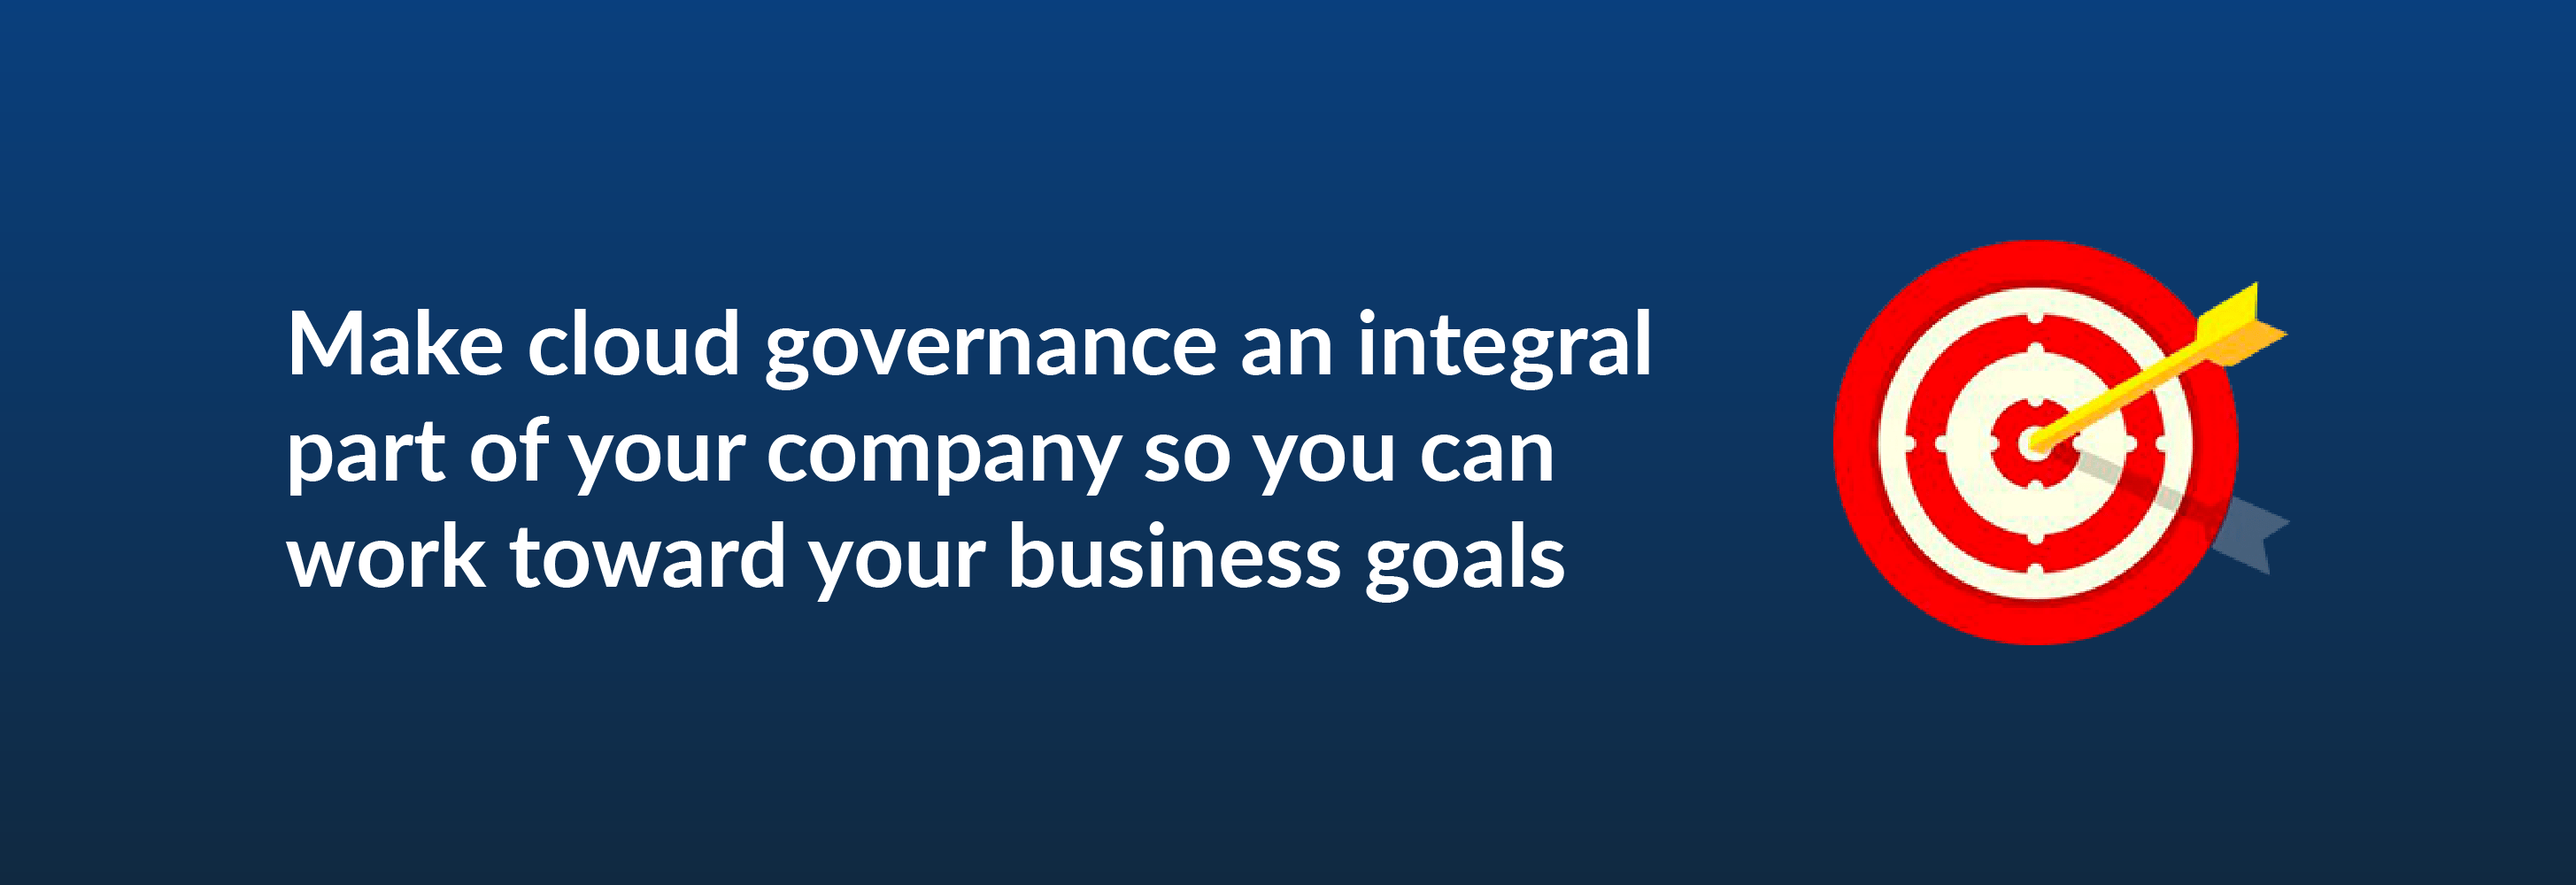 Make cloud governance an integral part of your company so you can work toward your business goals